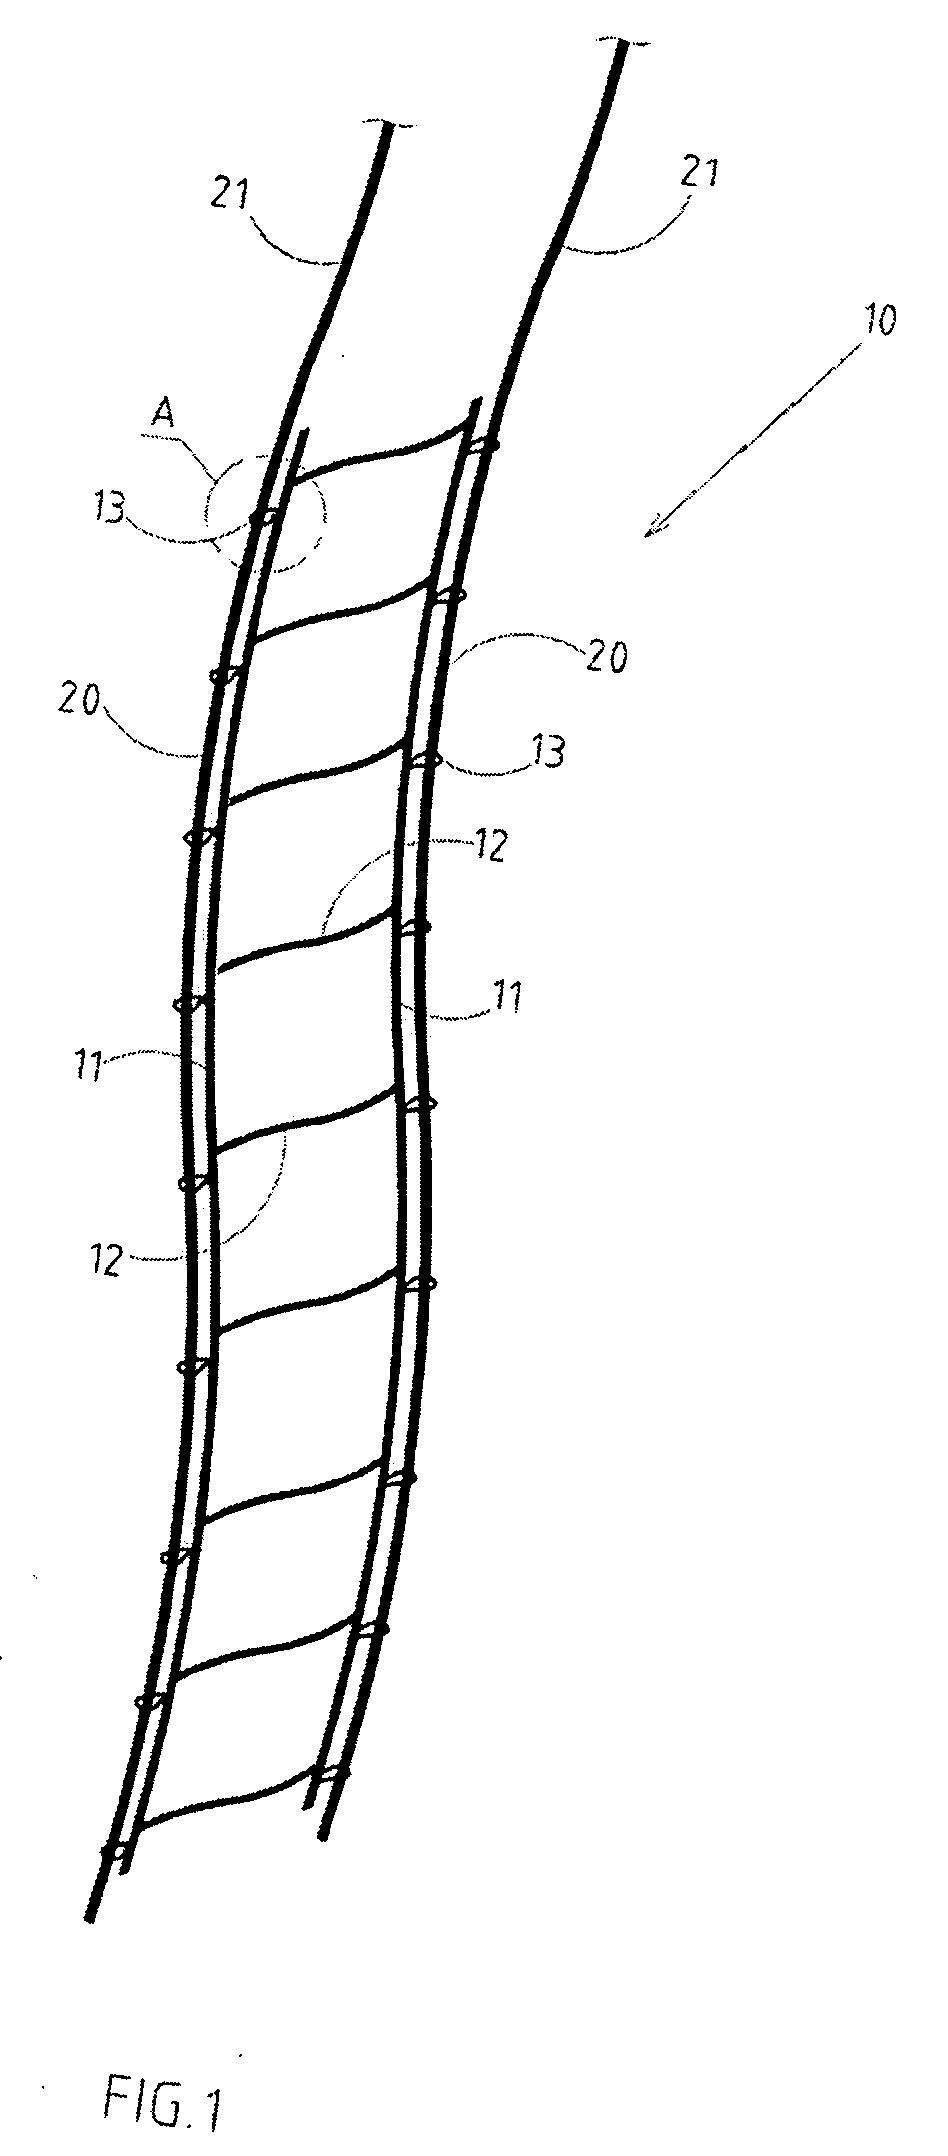 Grid strip component for shutters with pull cord